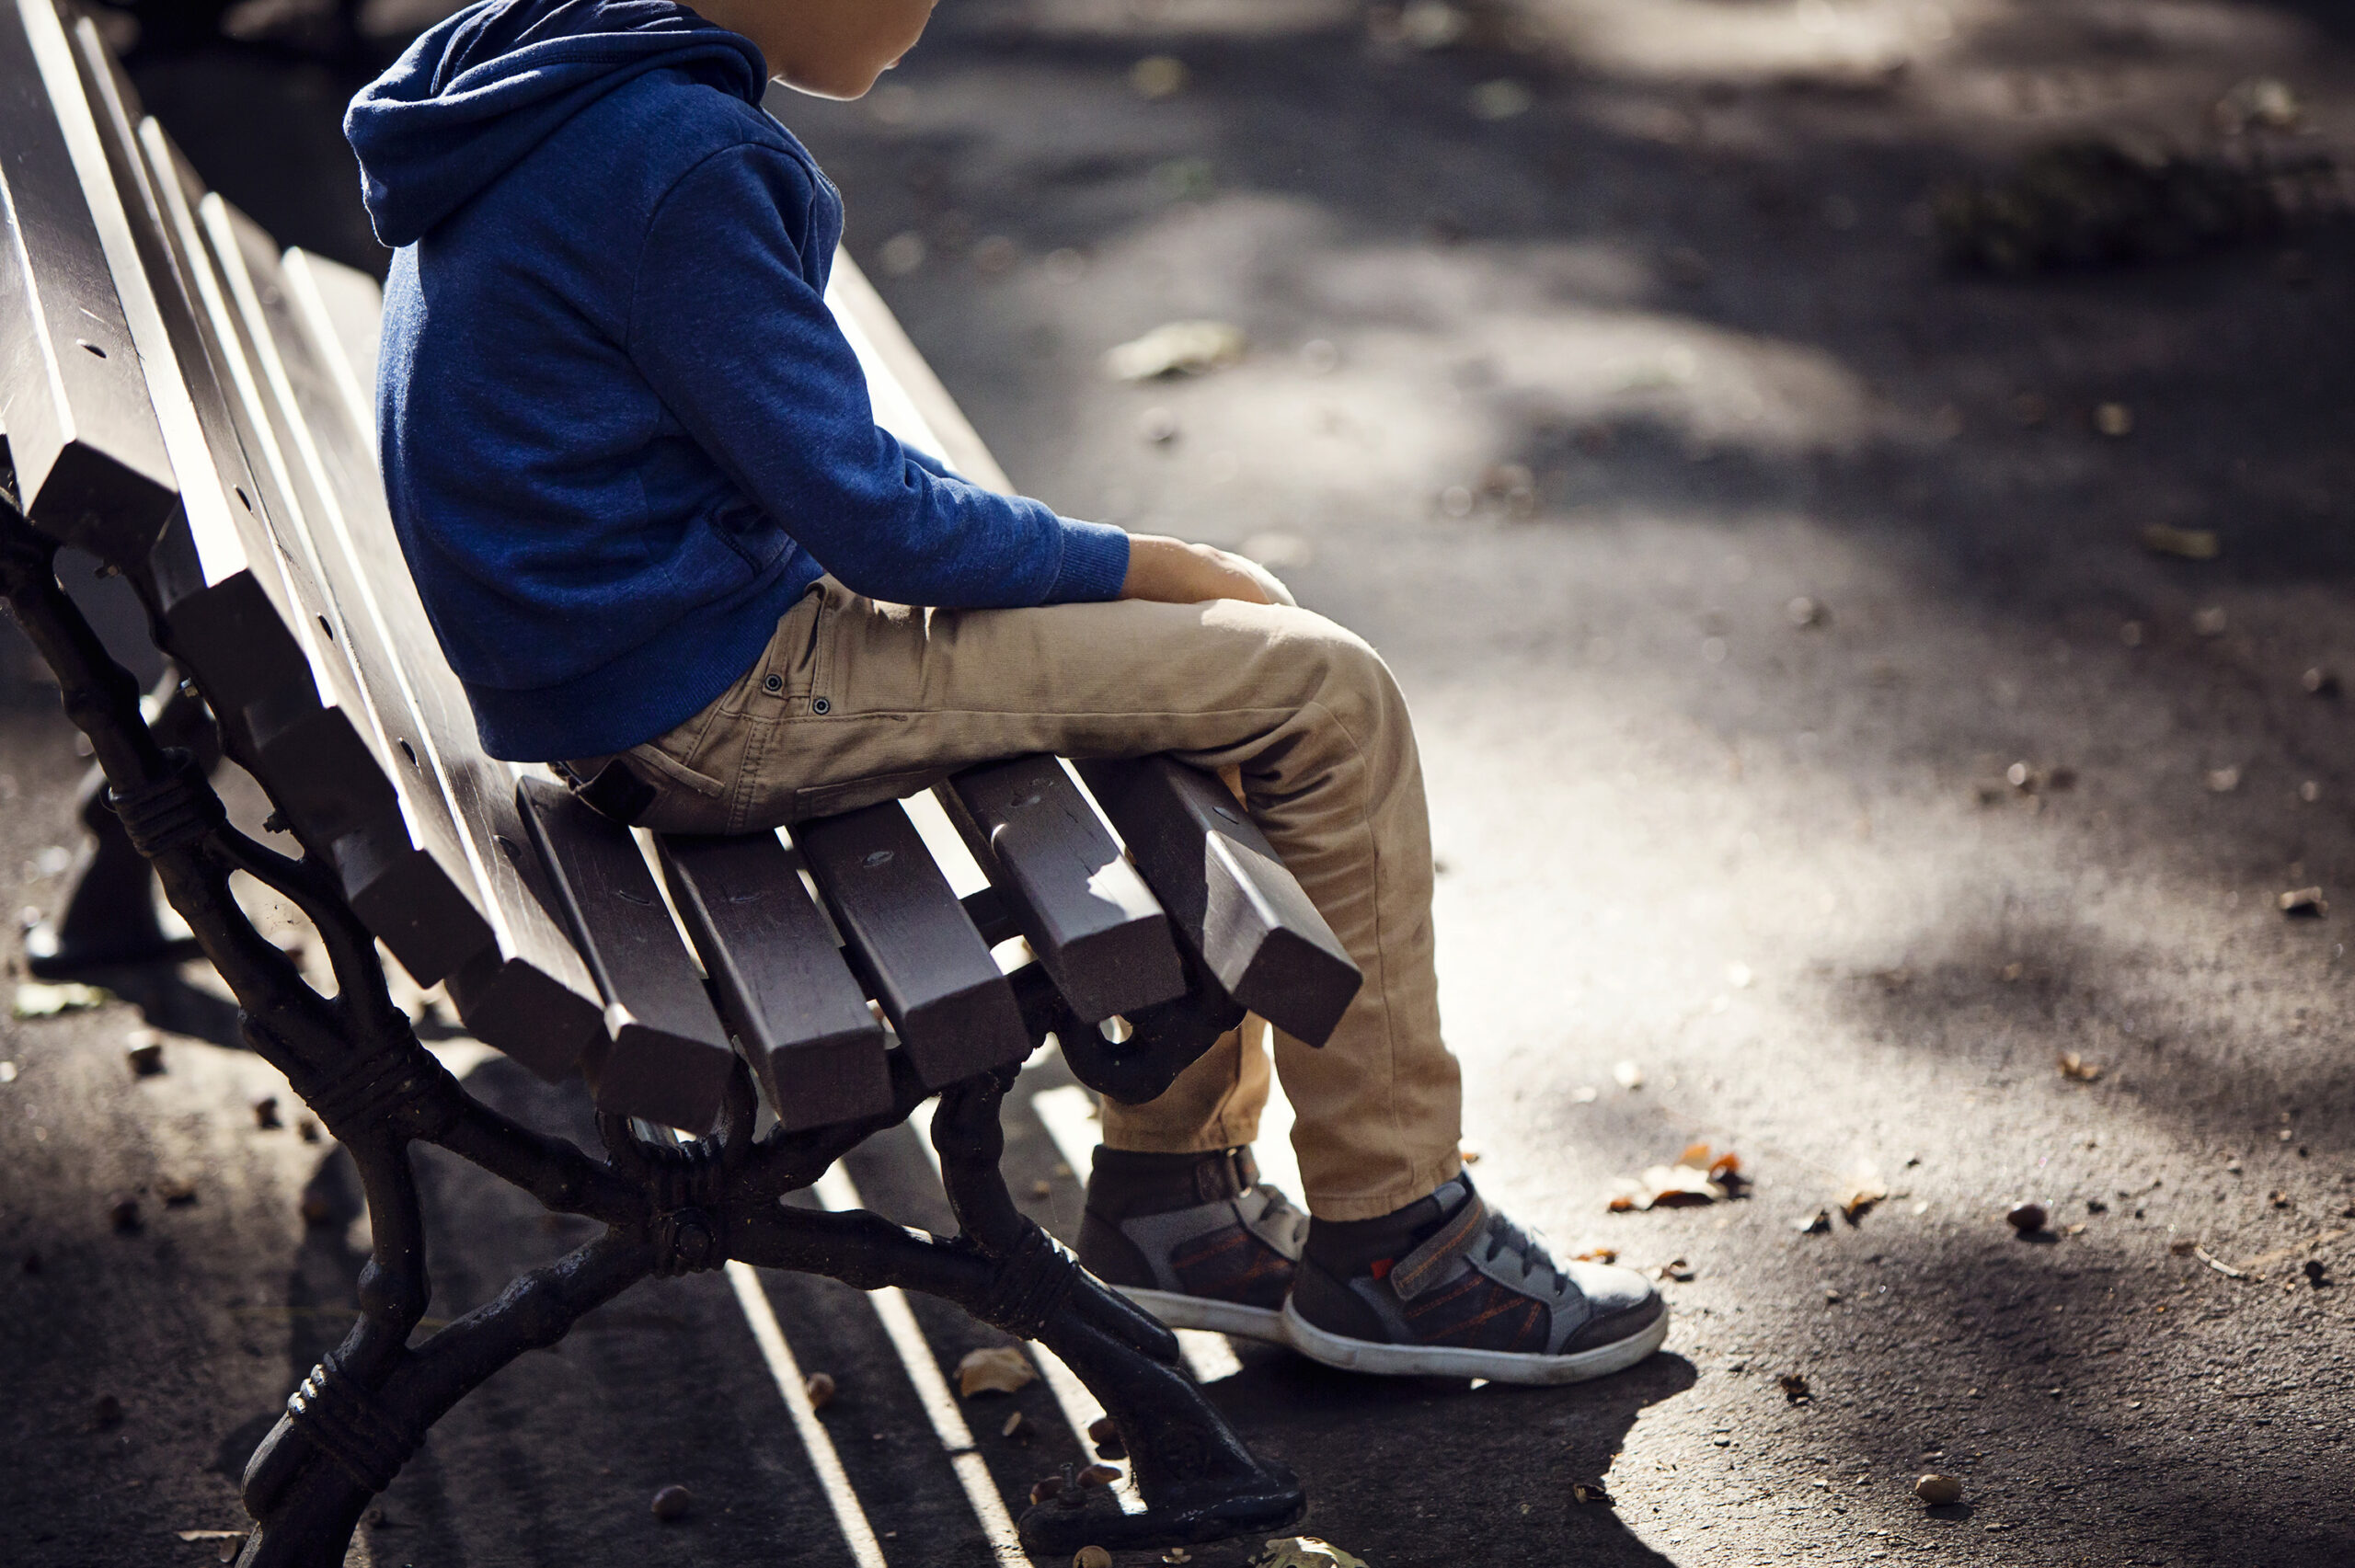 Addressing Adverse Childhood Experiences: An Overlooked Social Determinant of Health